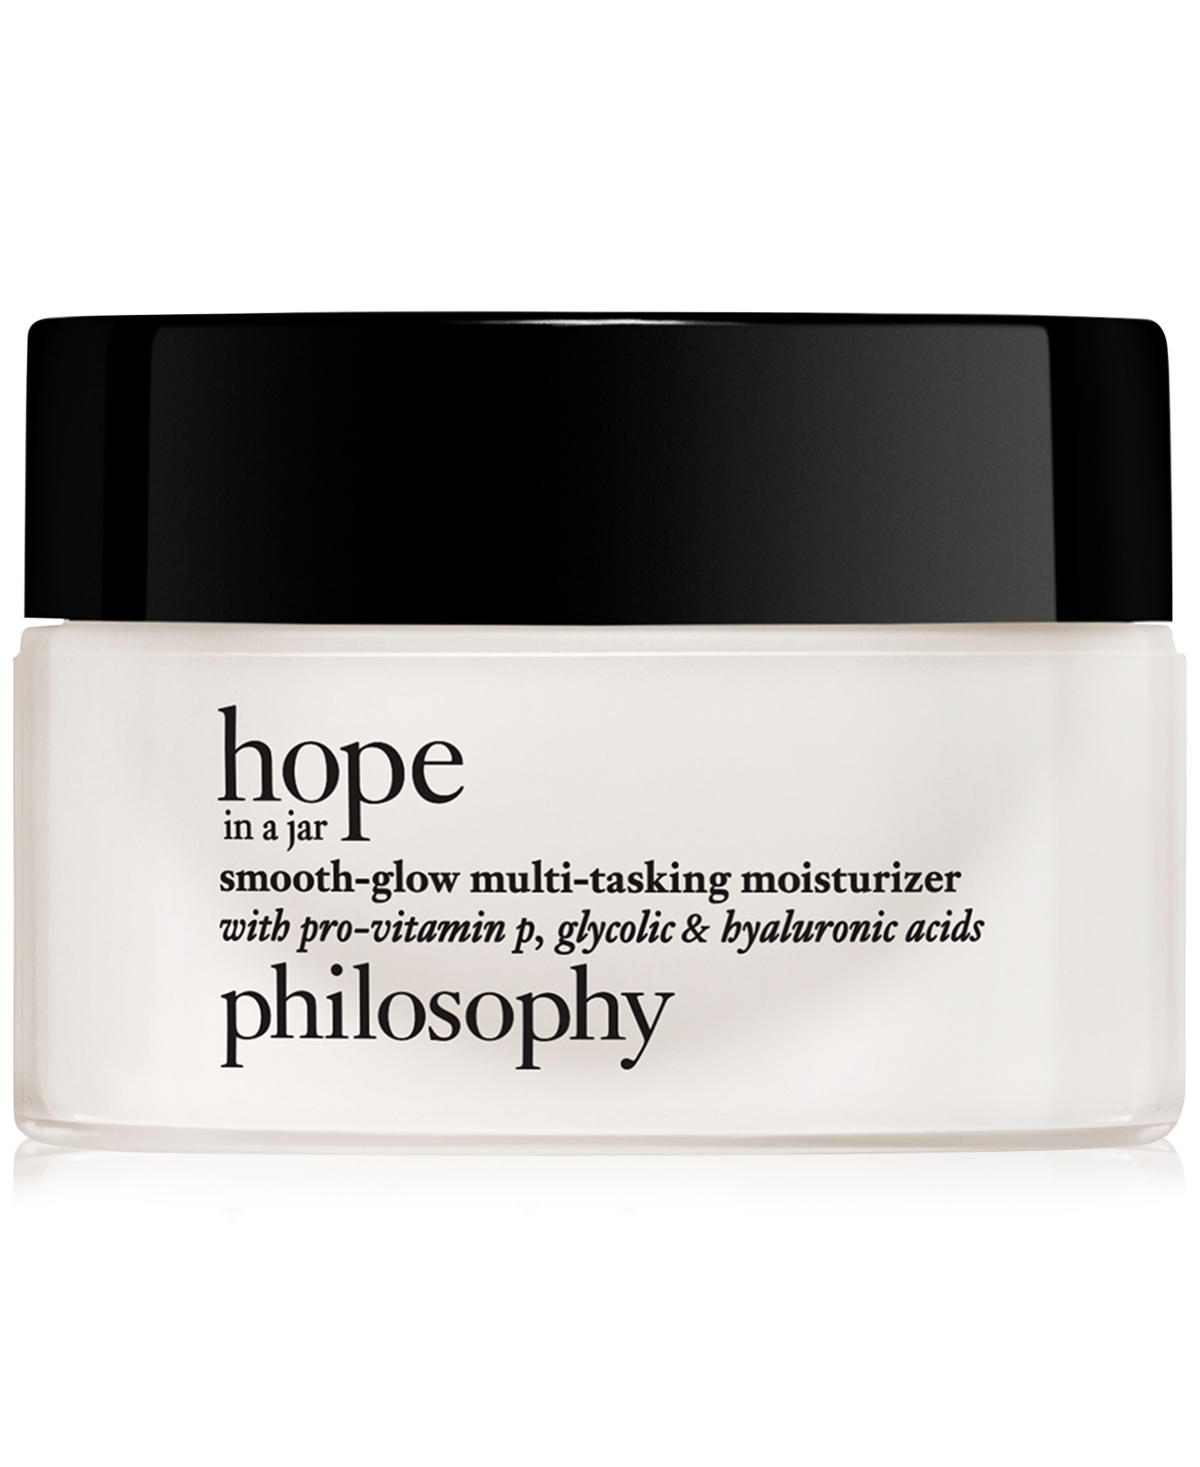 Hope In A Jar Smooth-Glow Multi-Tasking Moisturizer With Pro-Vitamin P, Glycolic & Hyaluronic Acids, 0.5 oz.